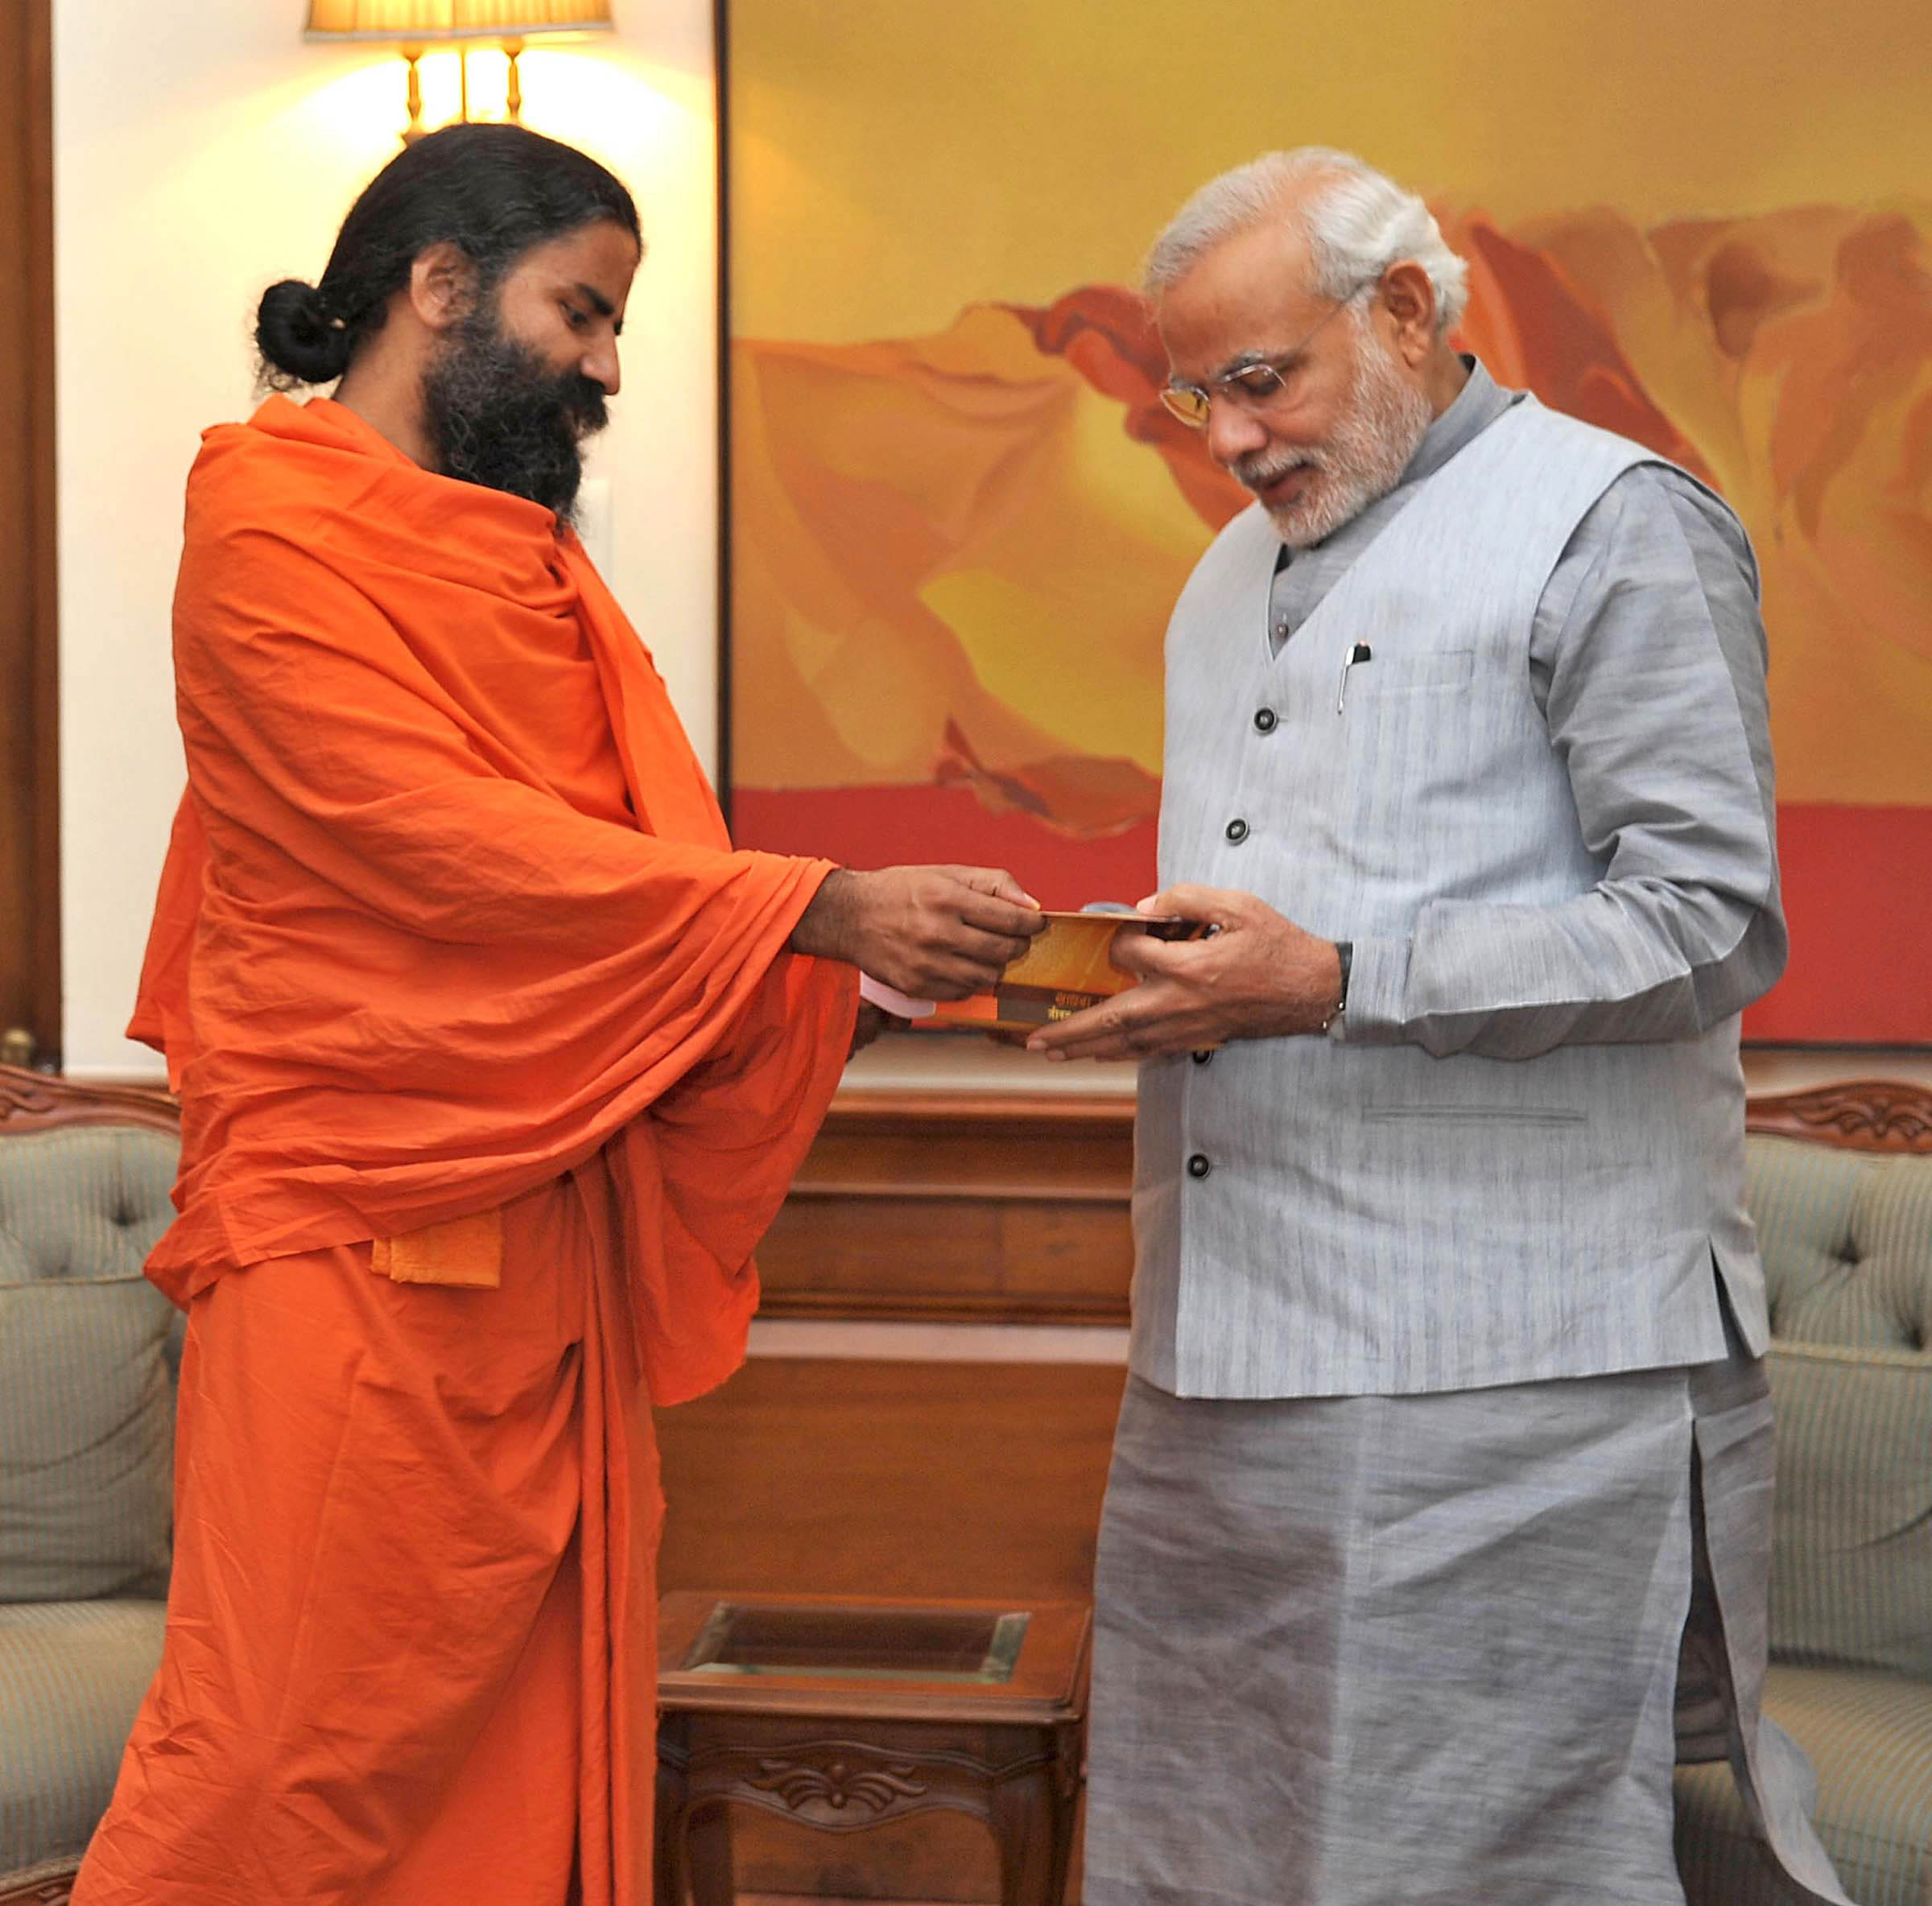 Ramdev Book: What39;s Baba Trying To Hide? - India Legal